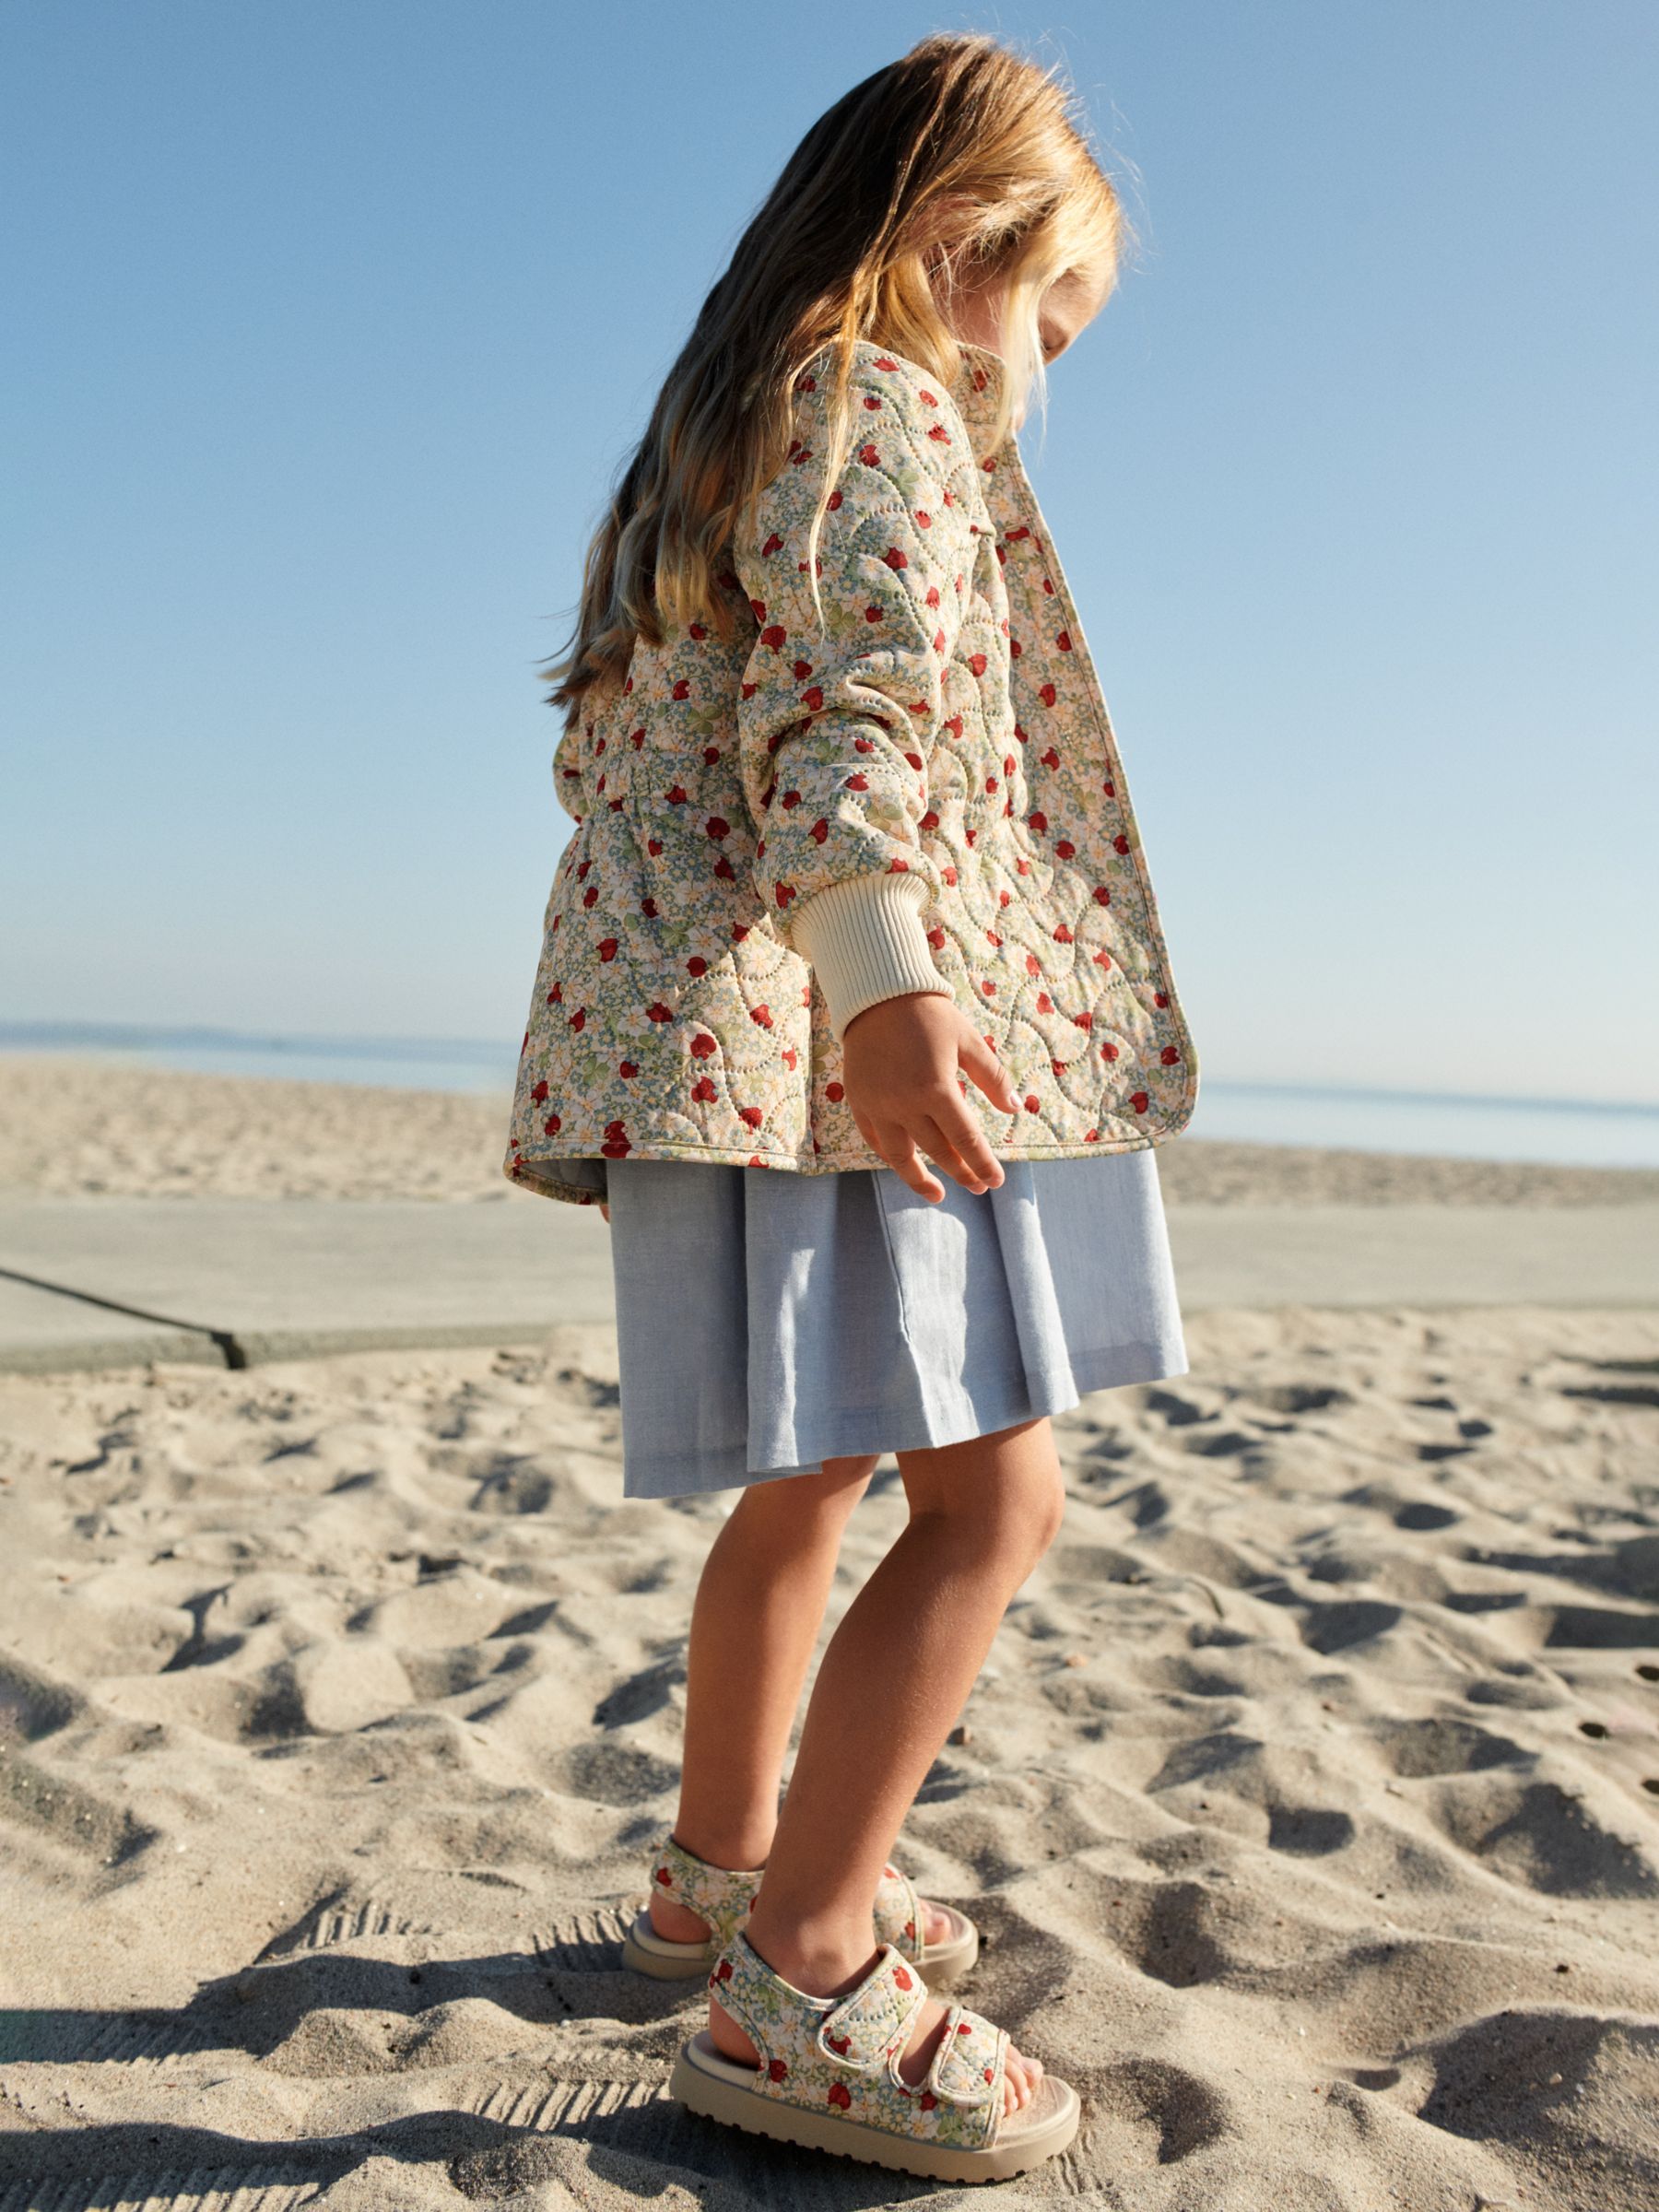 Buy WHEAT Kids' Thermo Loui Strawberry Print Jacket, Cream/Red Online at johnlewis.com